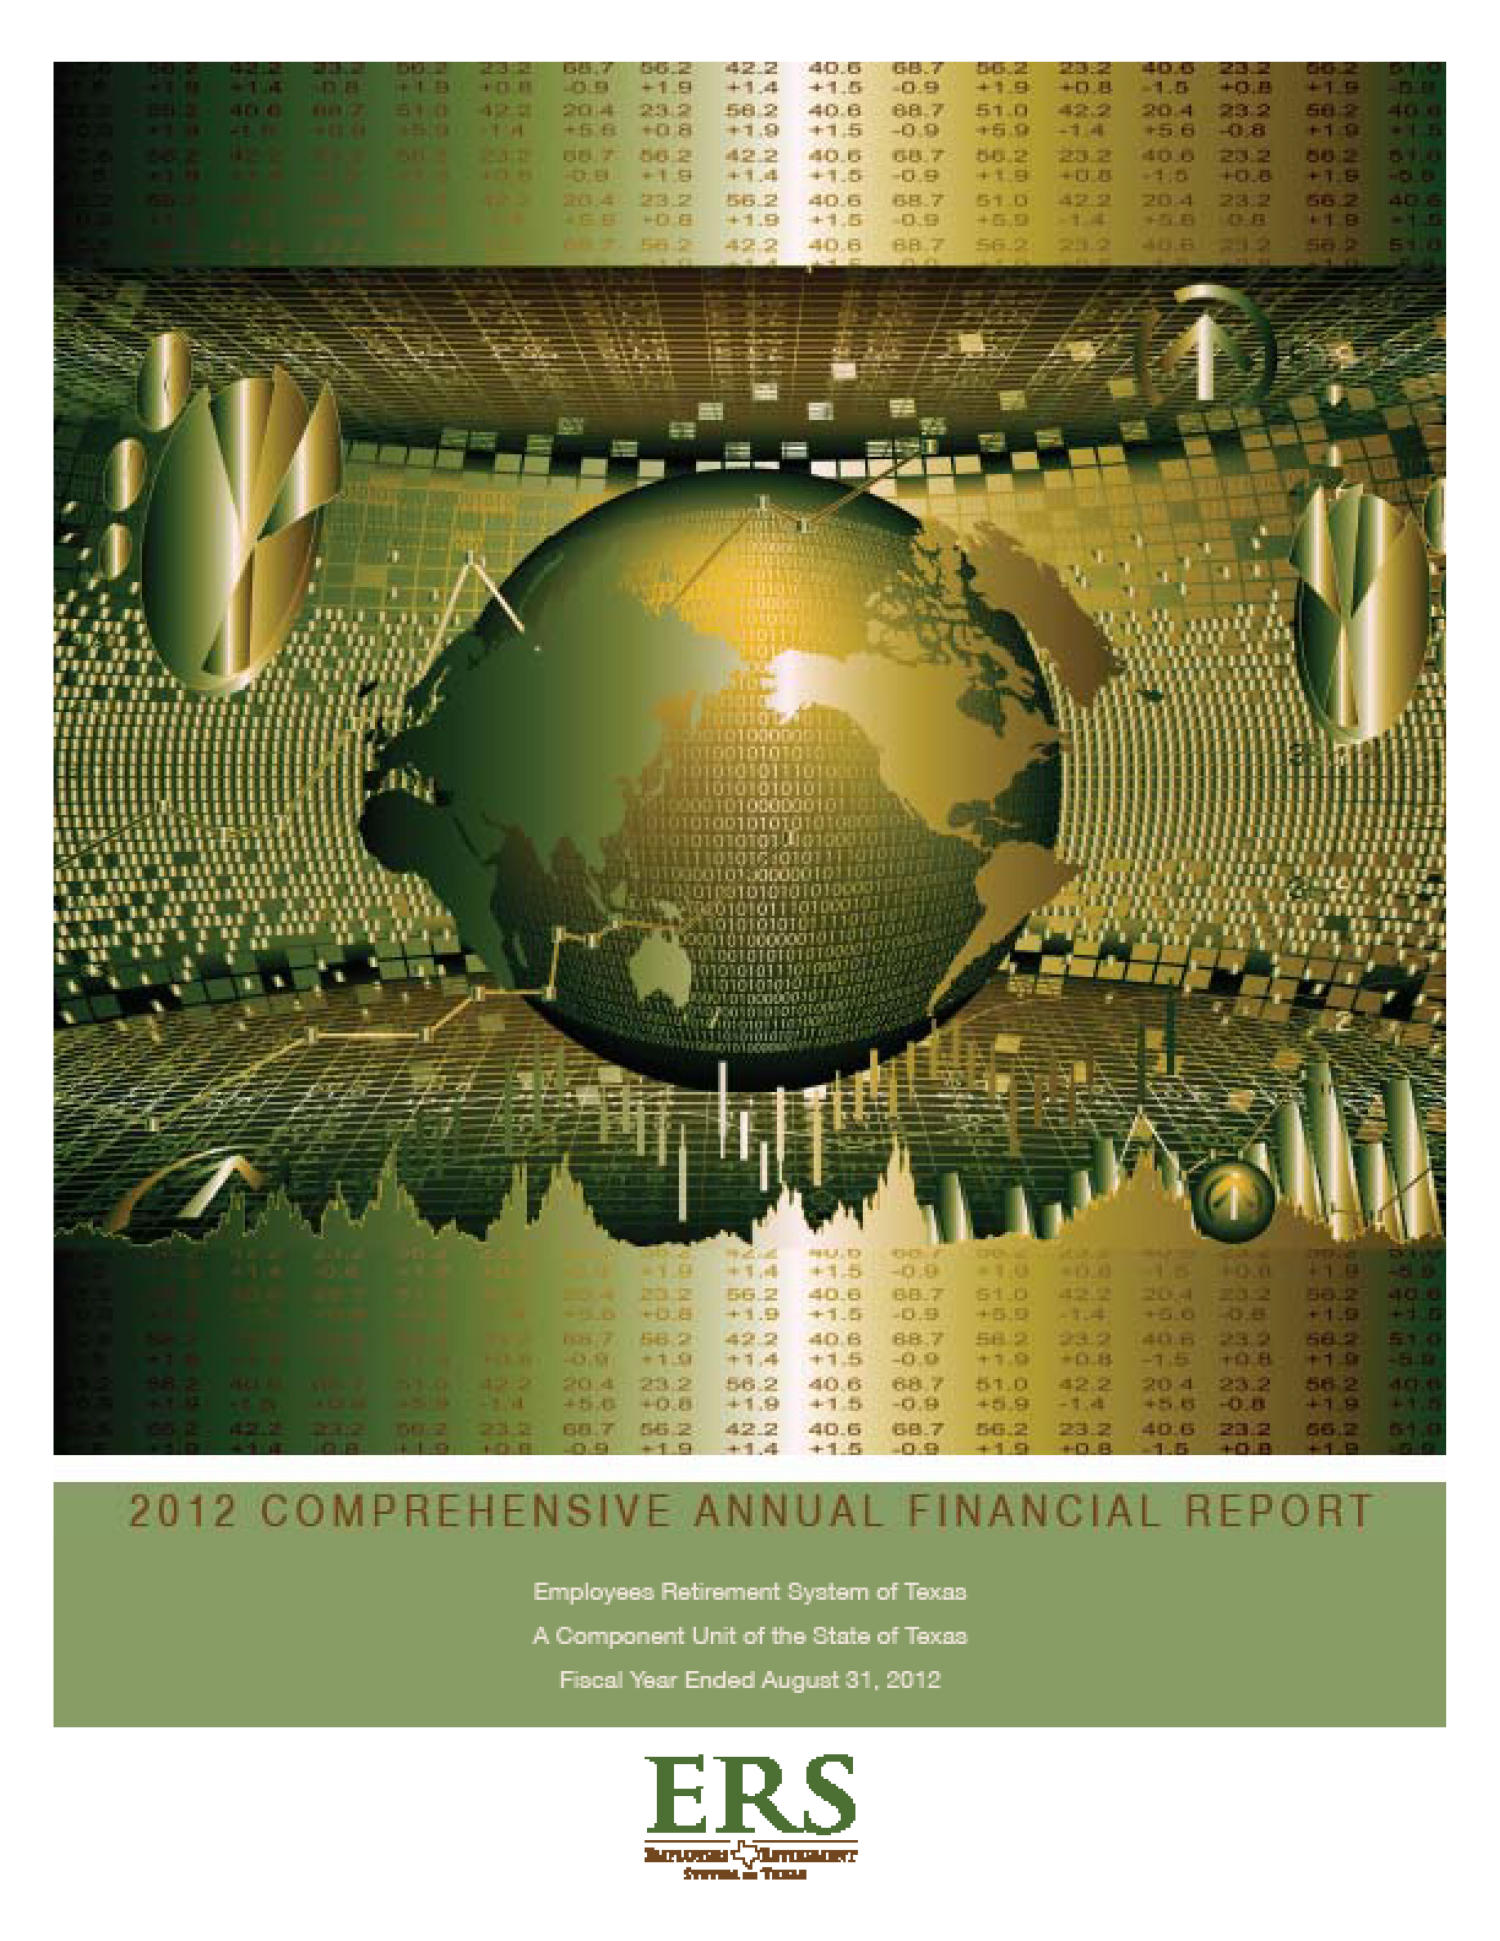 Employees Retirement System of Texas Comprehensive Annual Financial Report: 2012
                                                
                                                    Front Cover
                                                